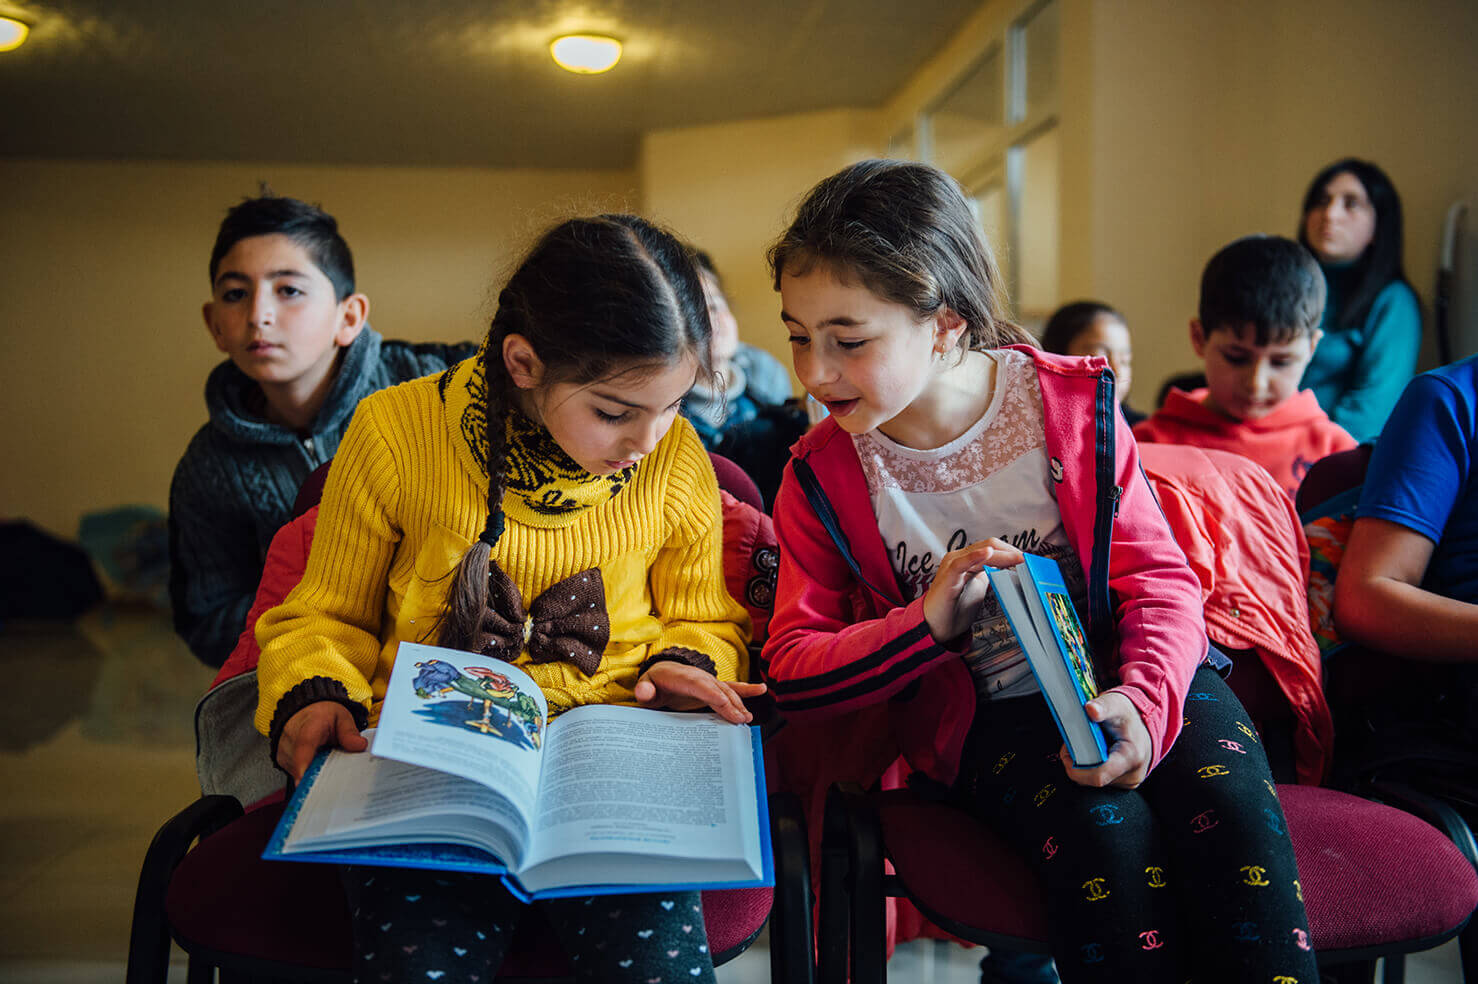 Children’s ministry is a vital part of the work in Armenia.